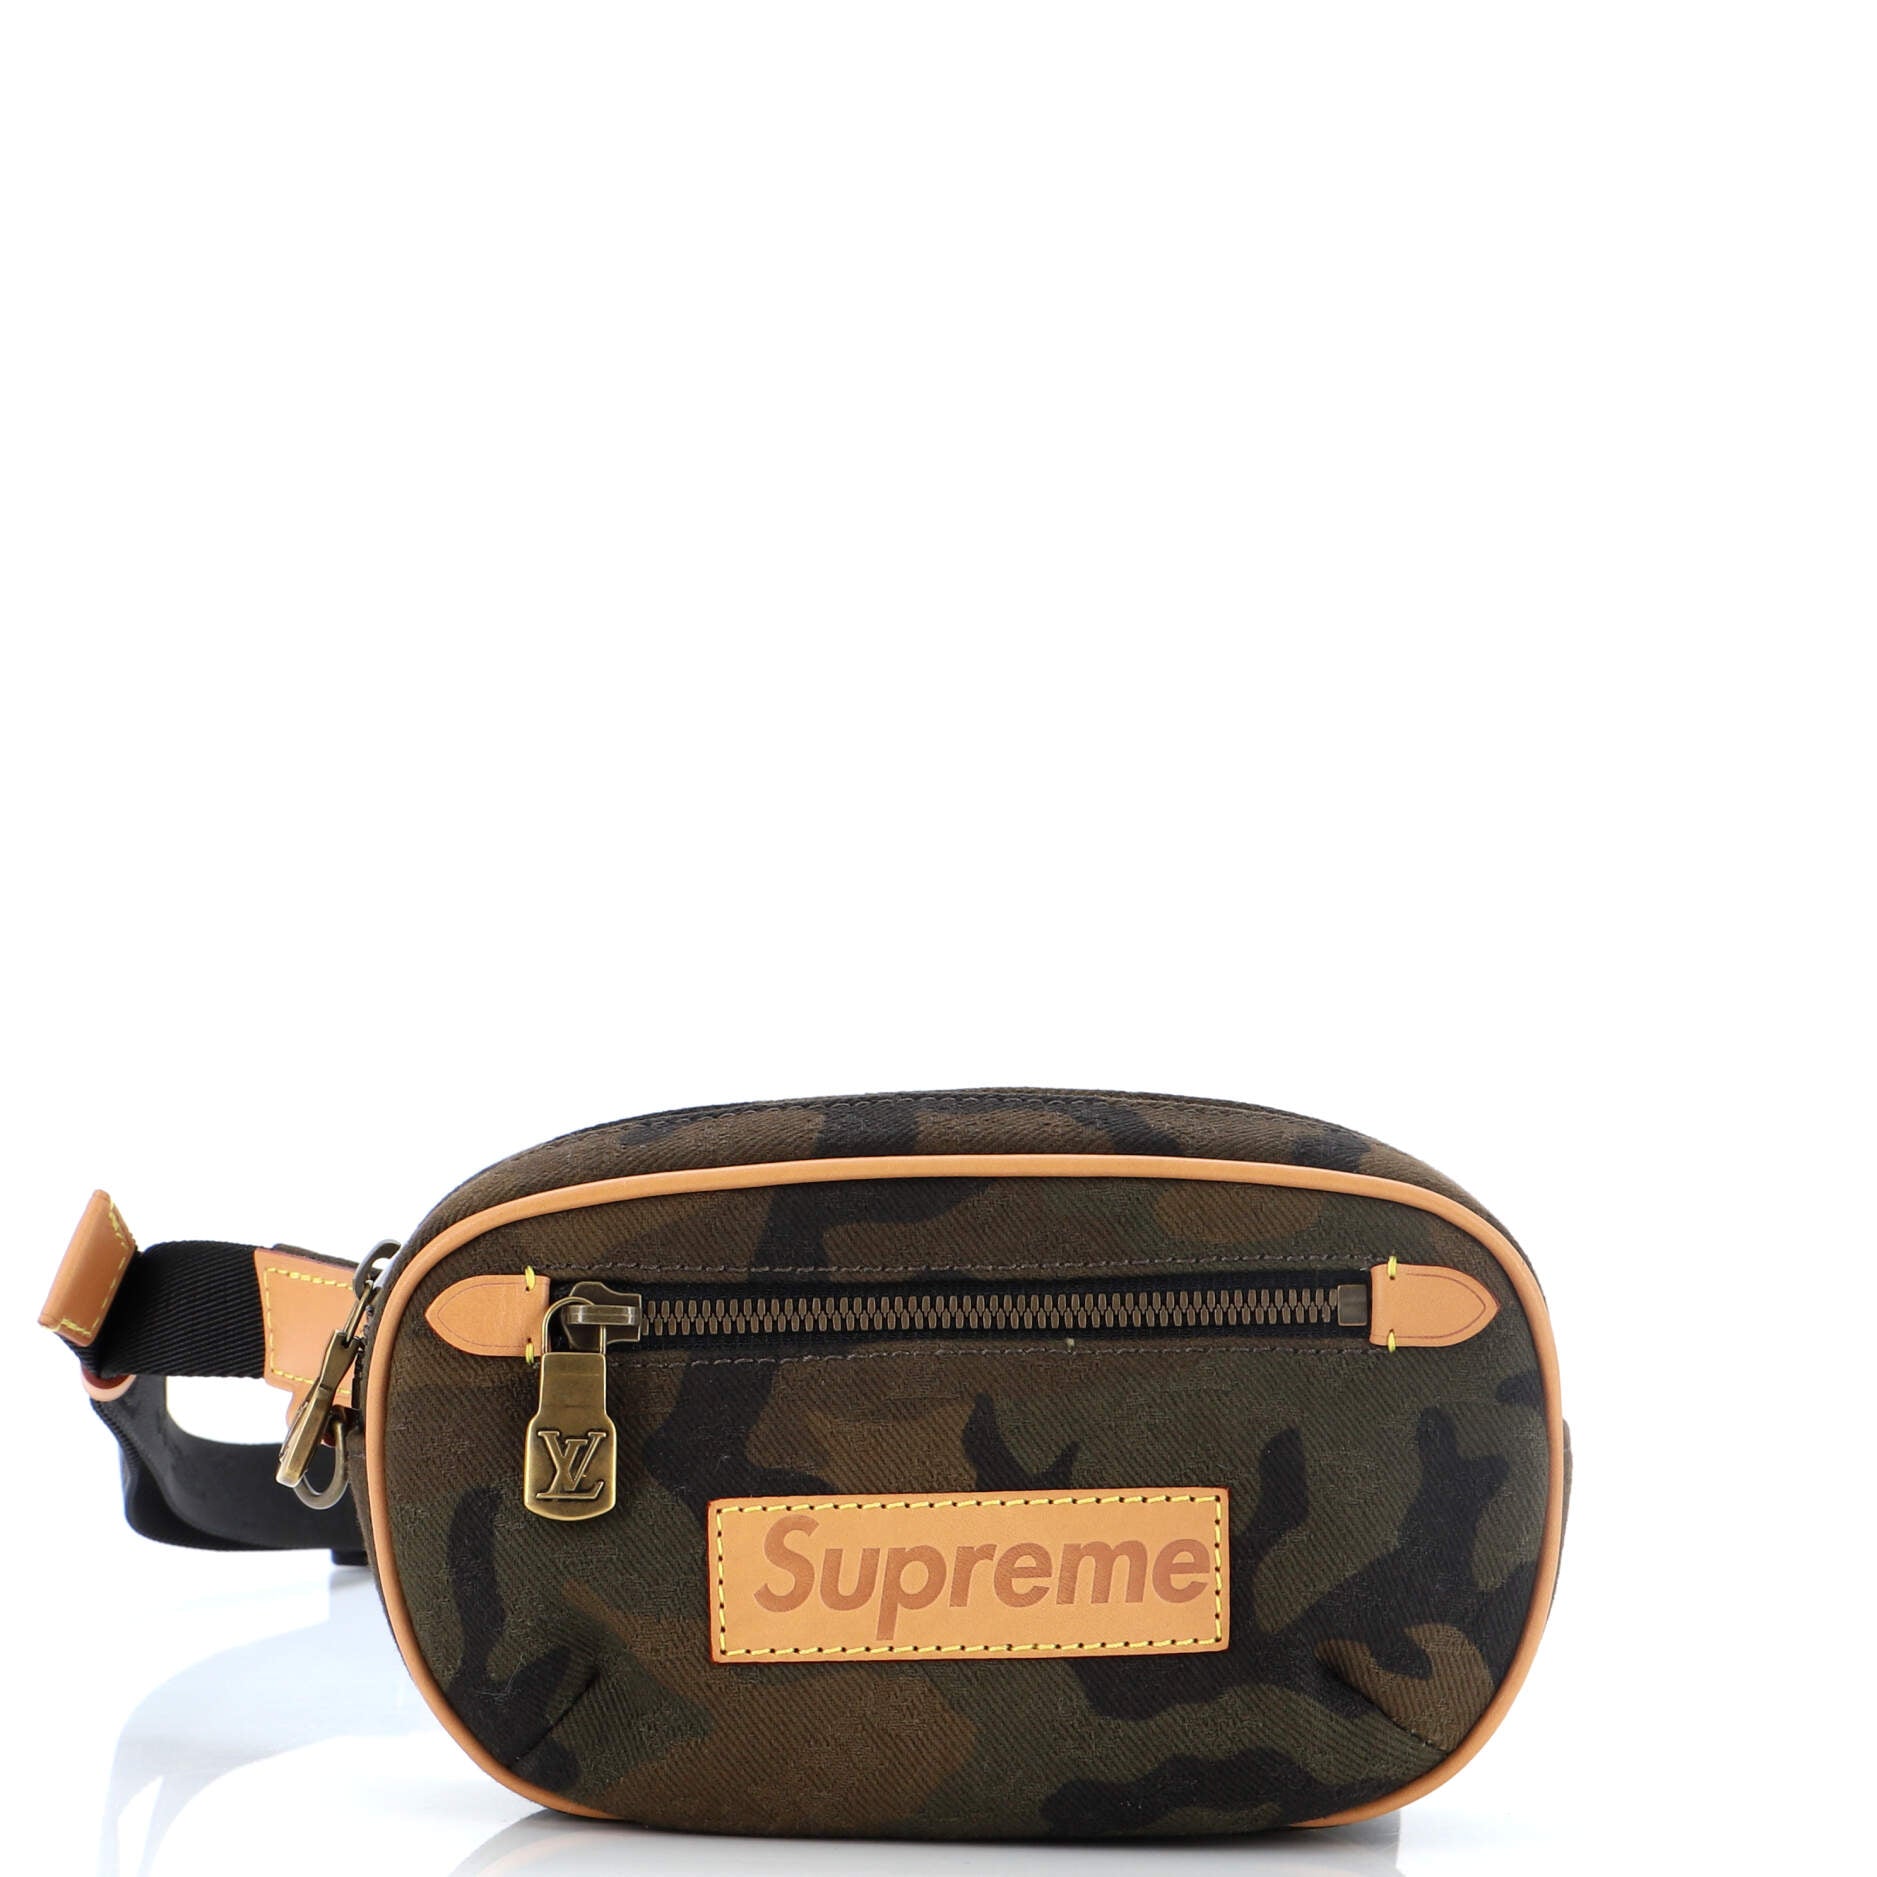 Bum Bag Limited Edition Supreme Camouflage Canvas